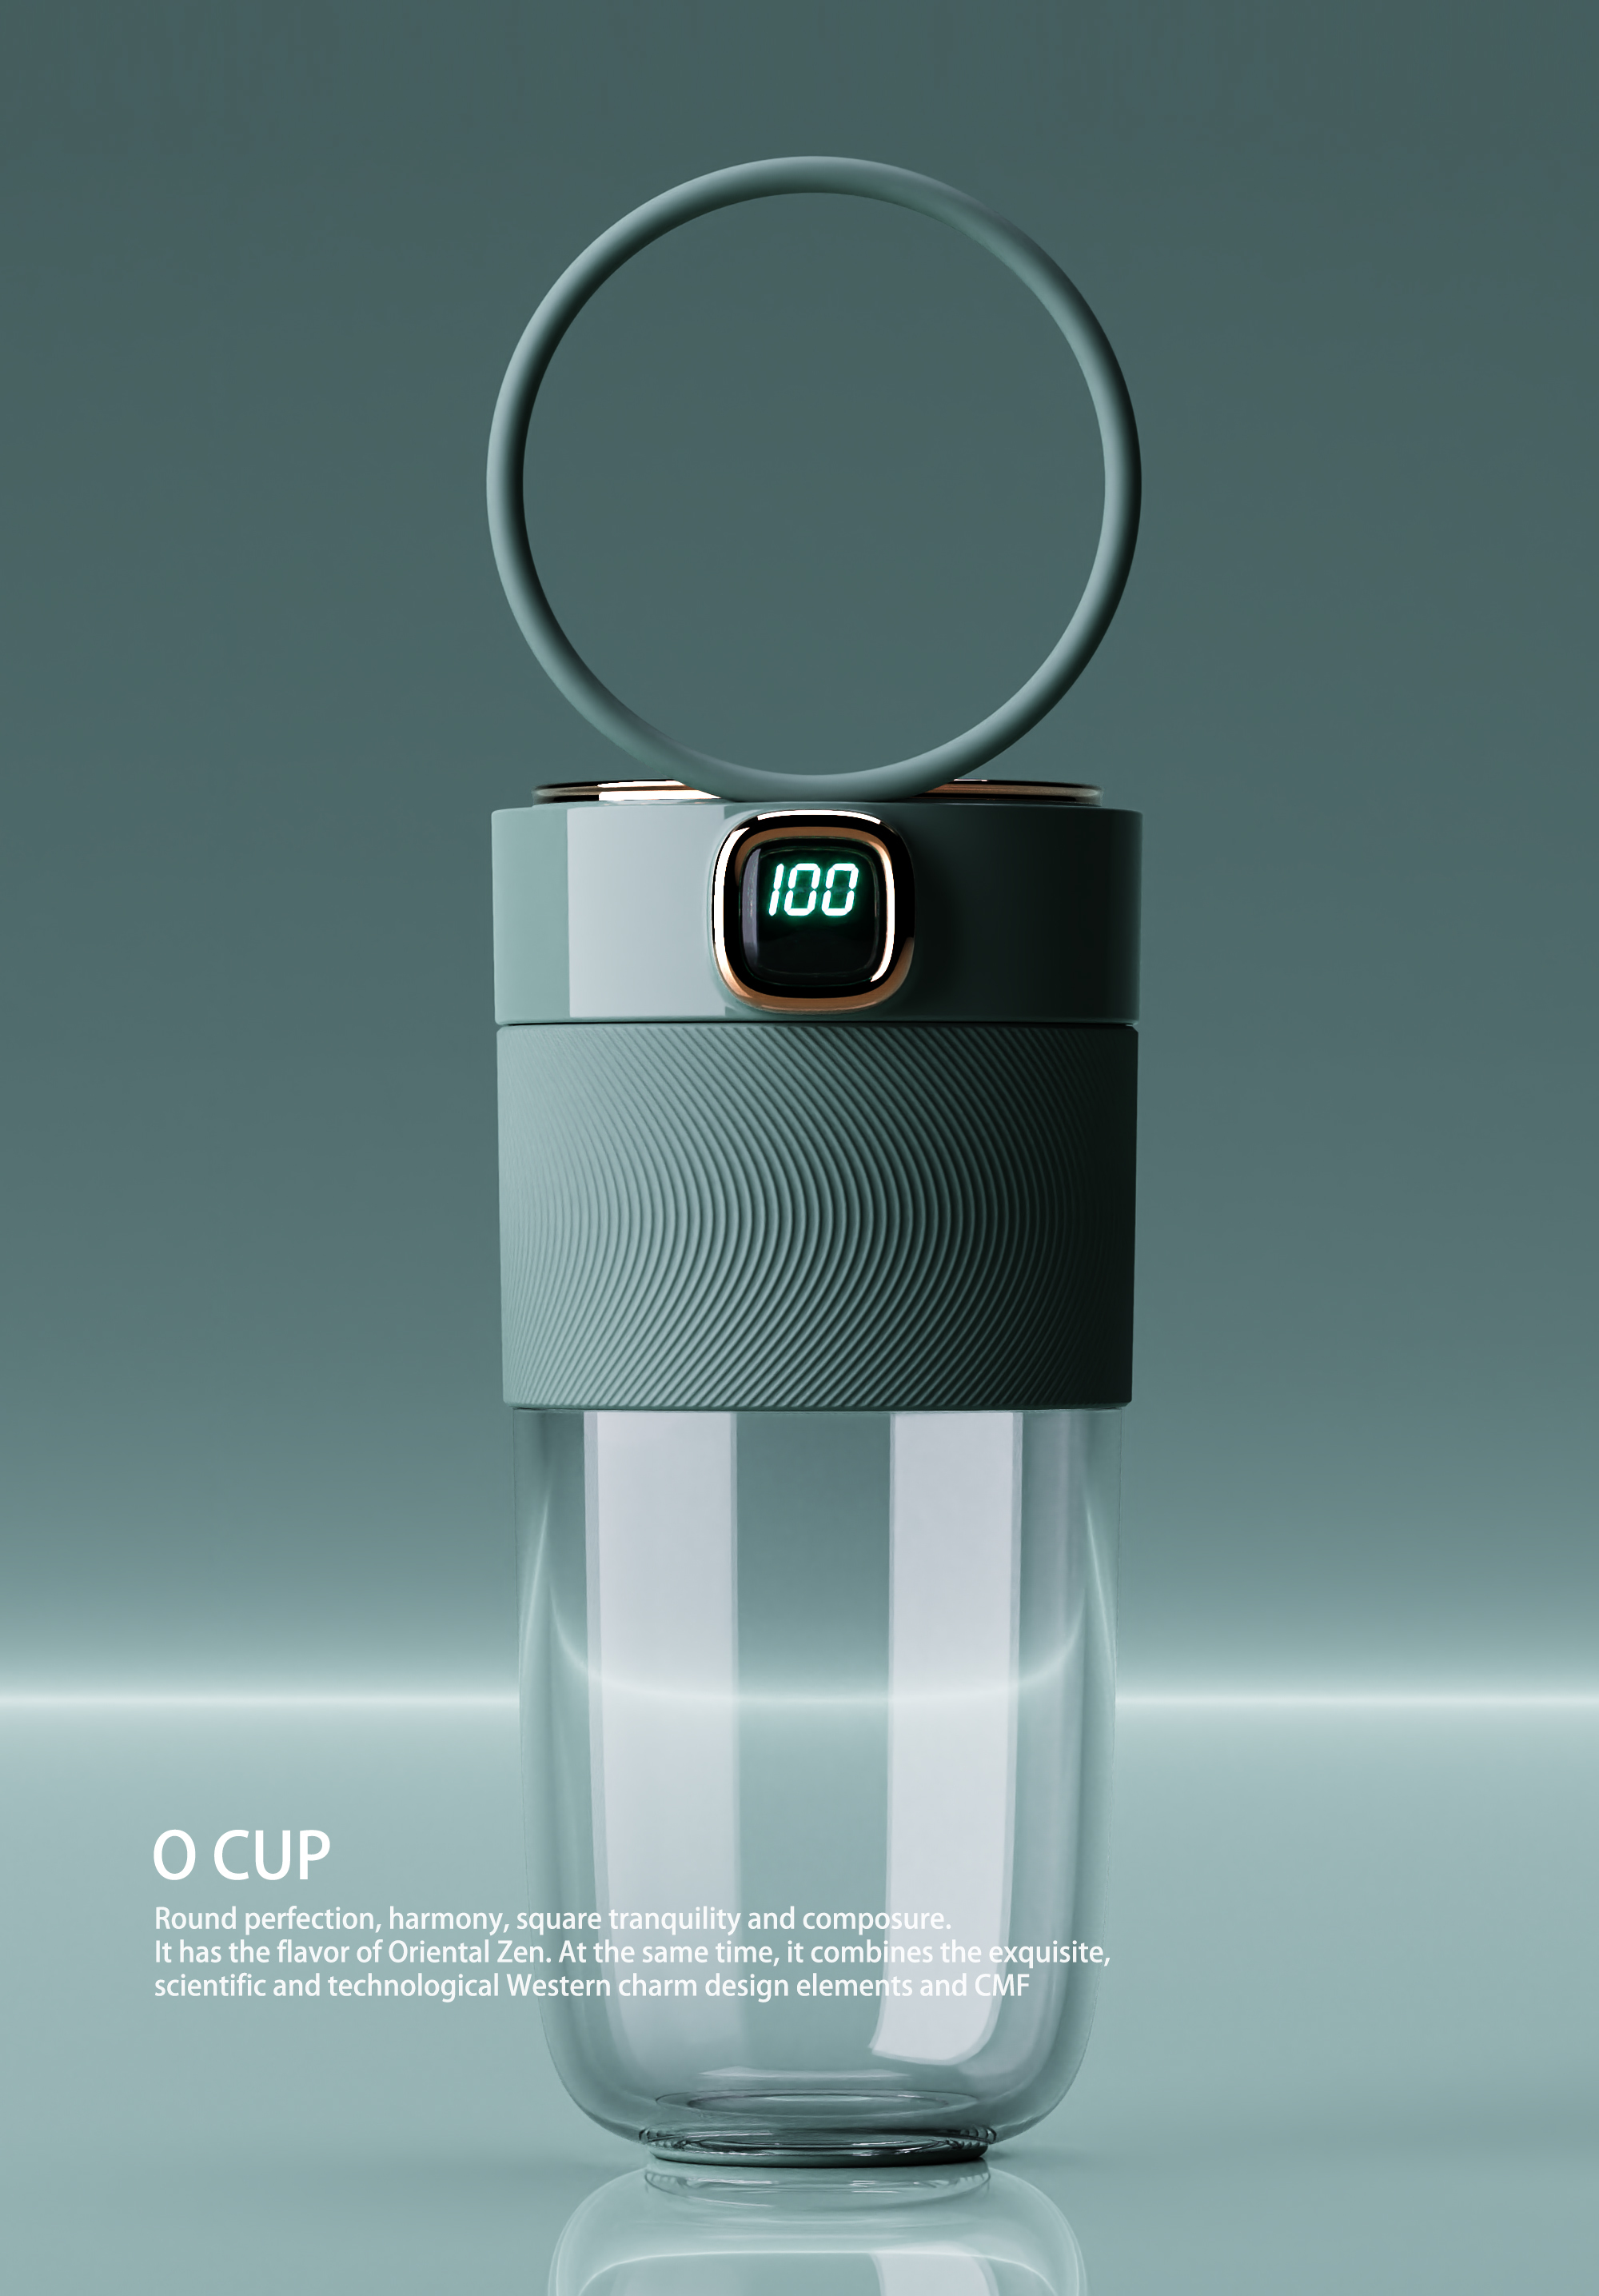 ”O CUP“ Juicer